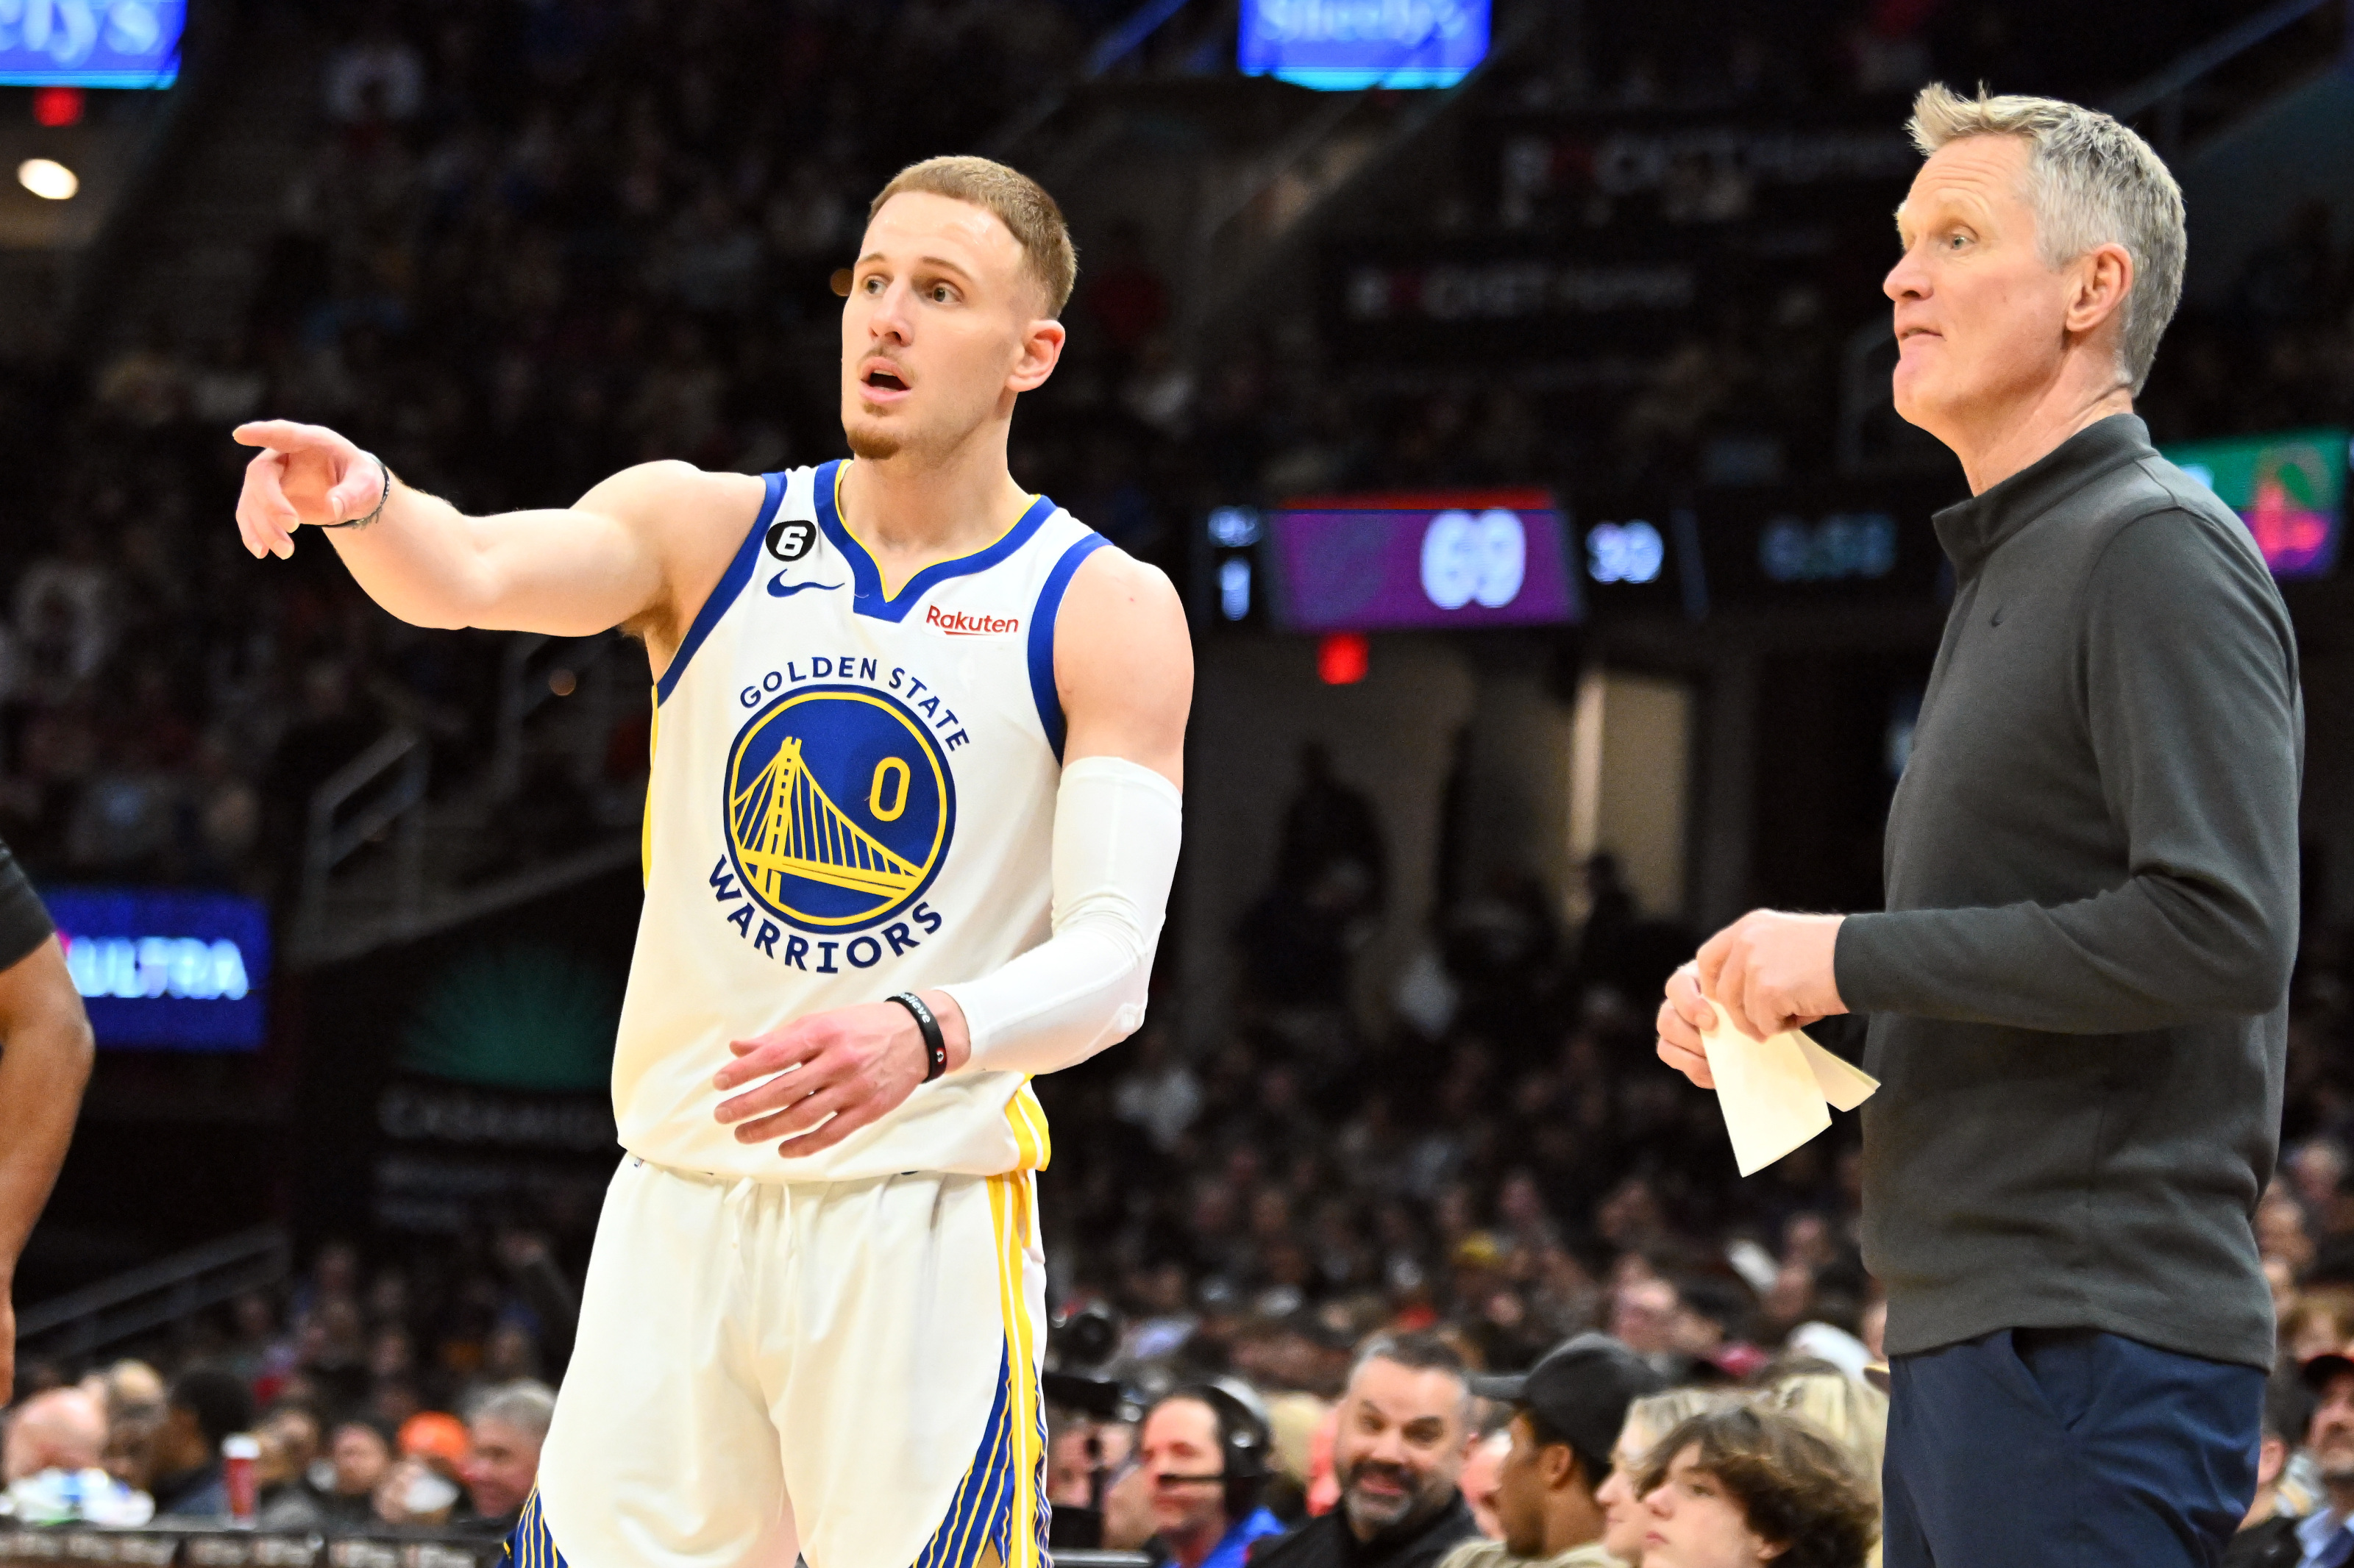 Guard closer to departing Golden State Warriors after free agency call